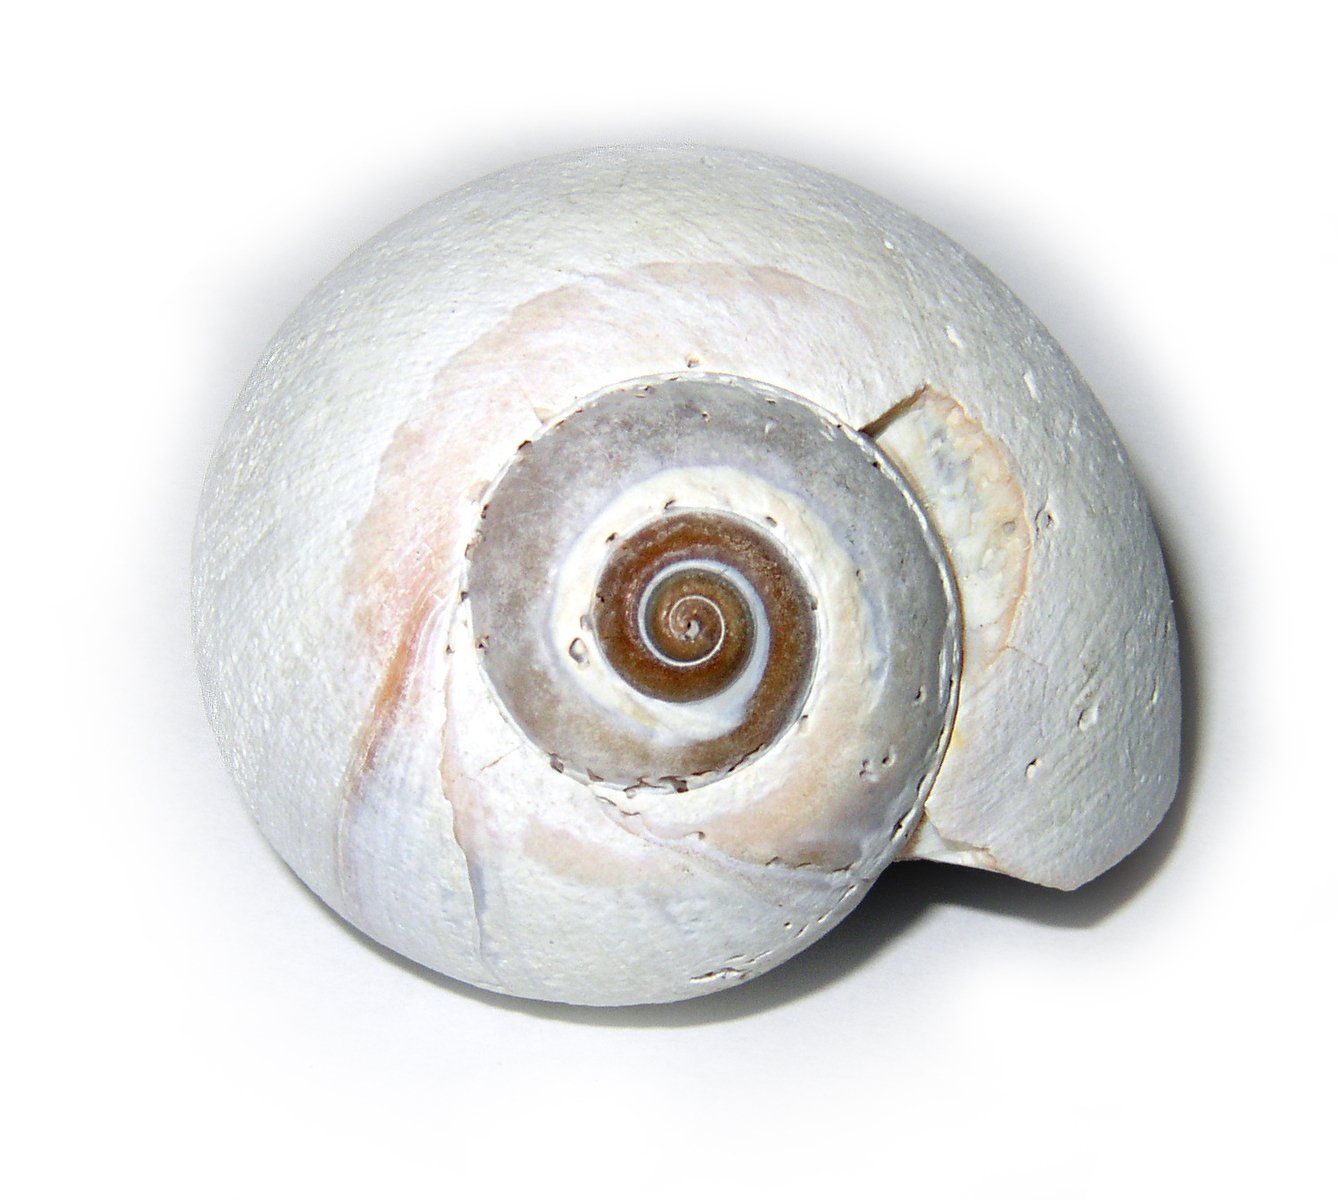 a large white and brown snail on a white surface